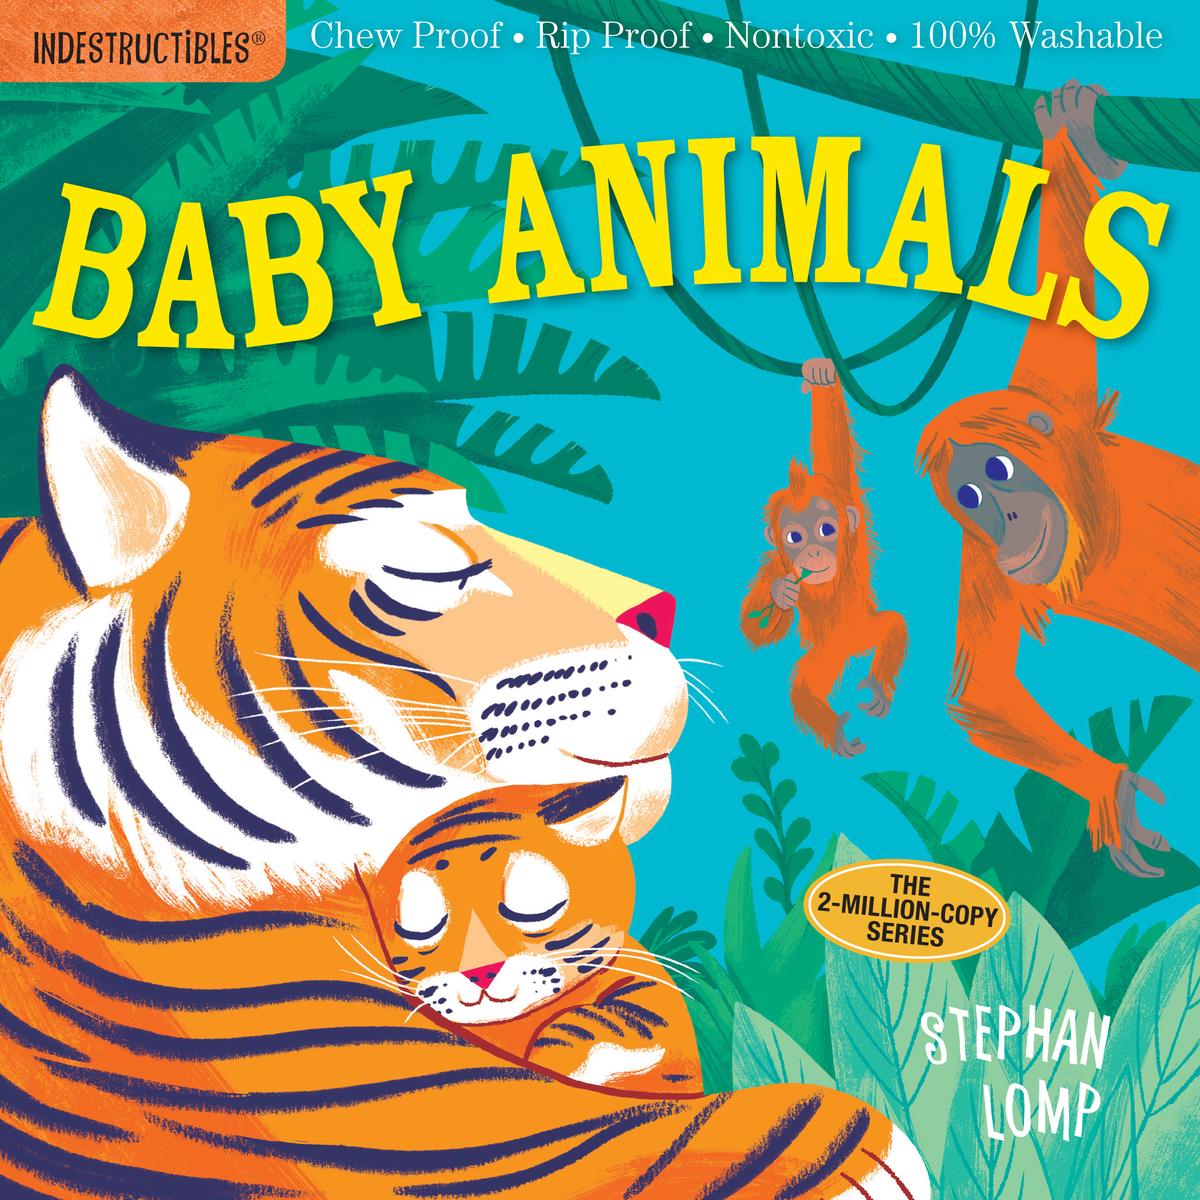 Indestructibles - Baby Animals: Chew Proof · Rip Proof · Nontoxic · 100% Washable (Book for Babies, Newborn Books, Safe to Chew)